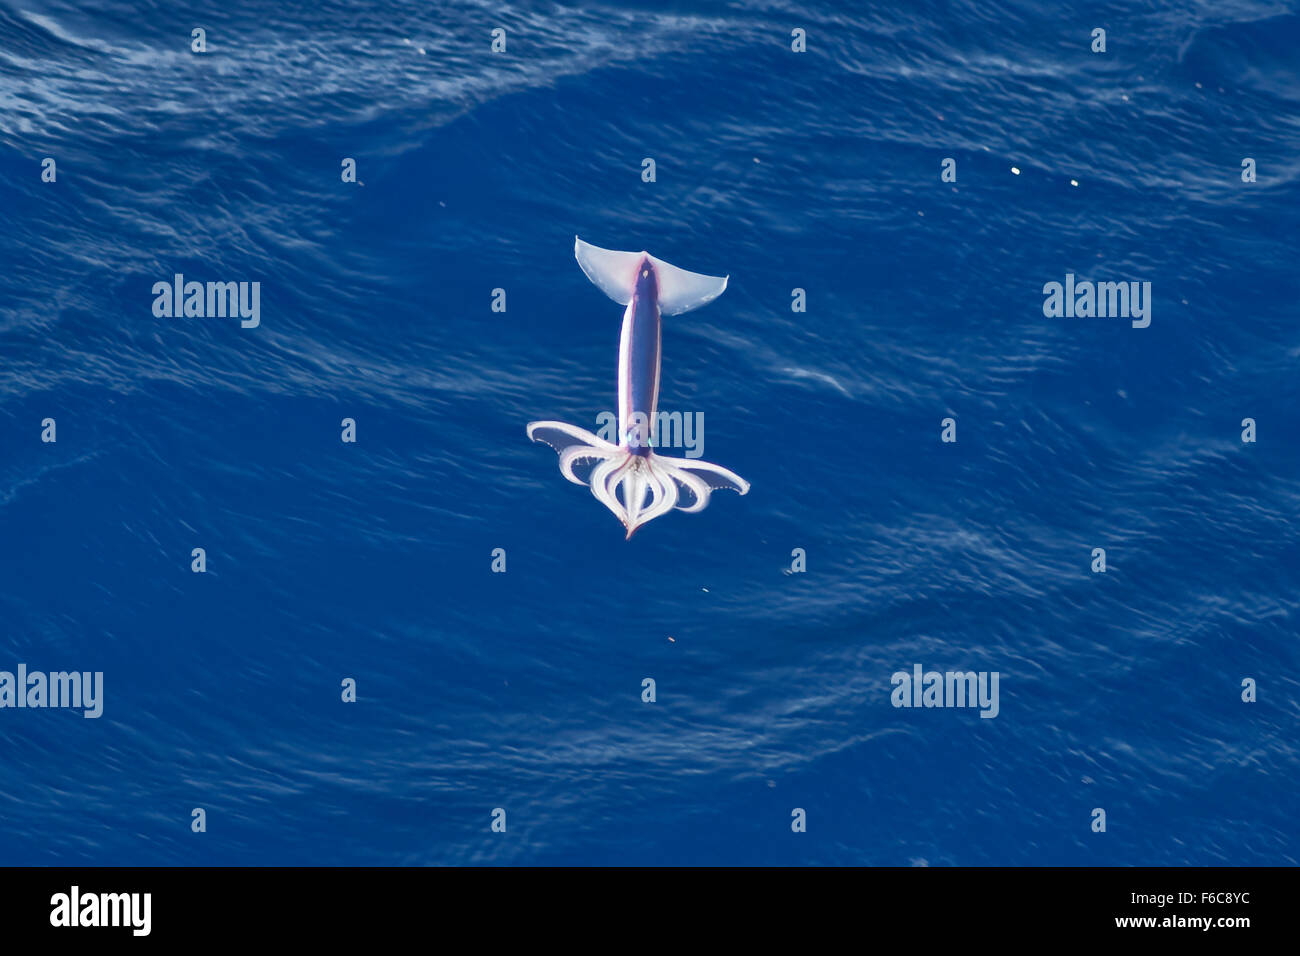 Very rare image of a Neon Flying Squid (Ommastrephes bartramii) in mid-air, South Atlantic Ocean, NOT a digital manipulation Stock Photo